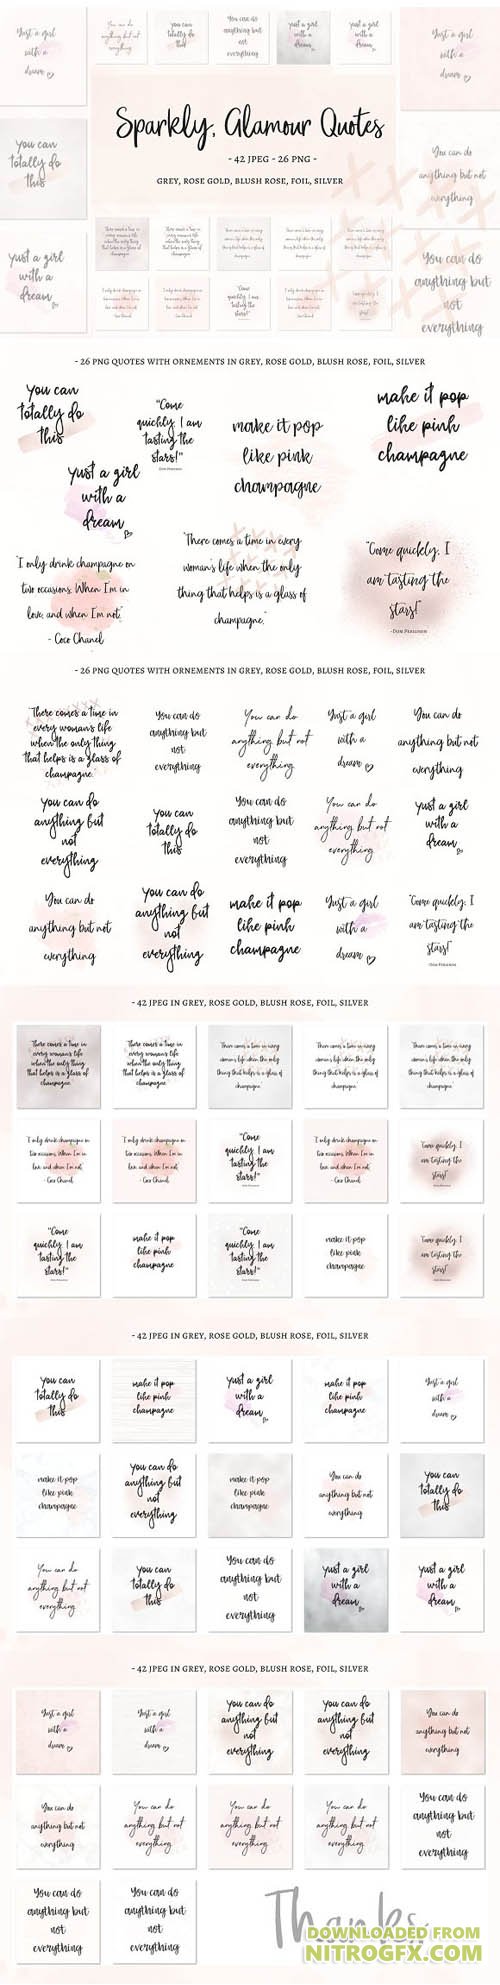 CreativeMarket - Sparkly Glamour Quotes - 1827410